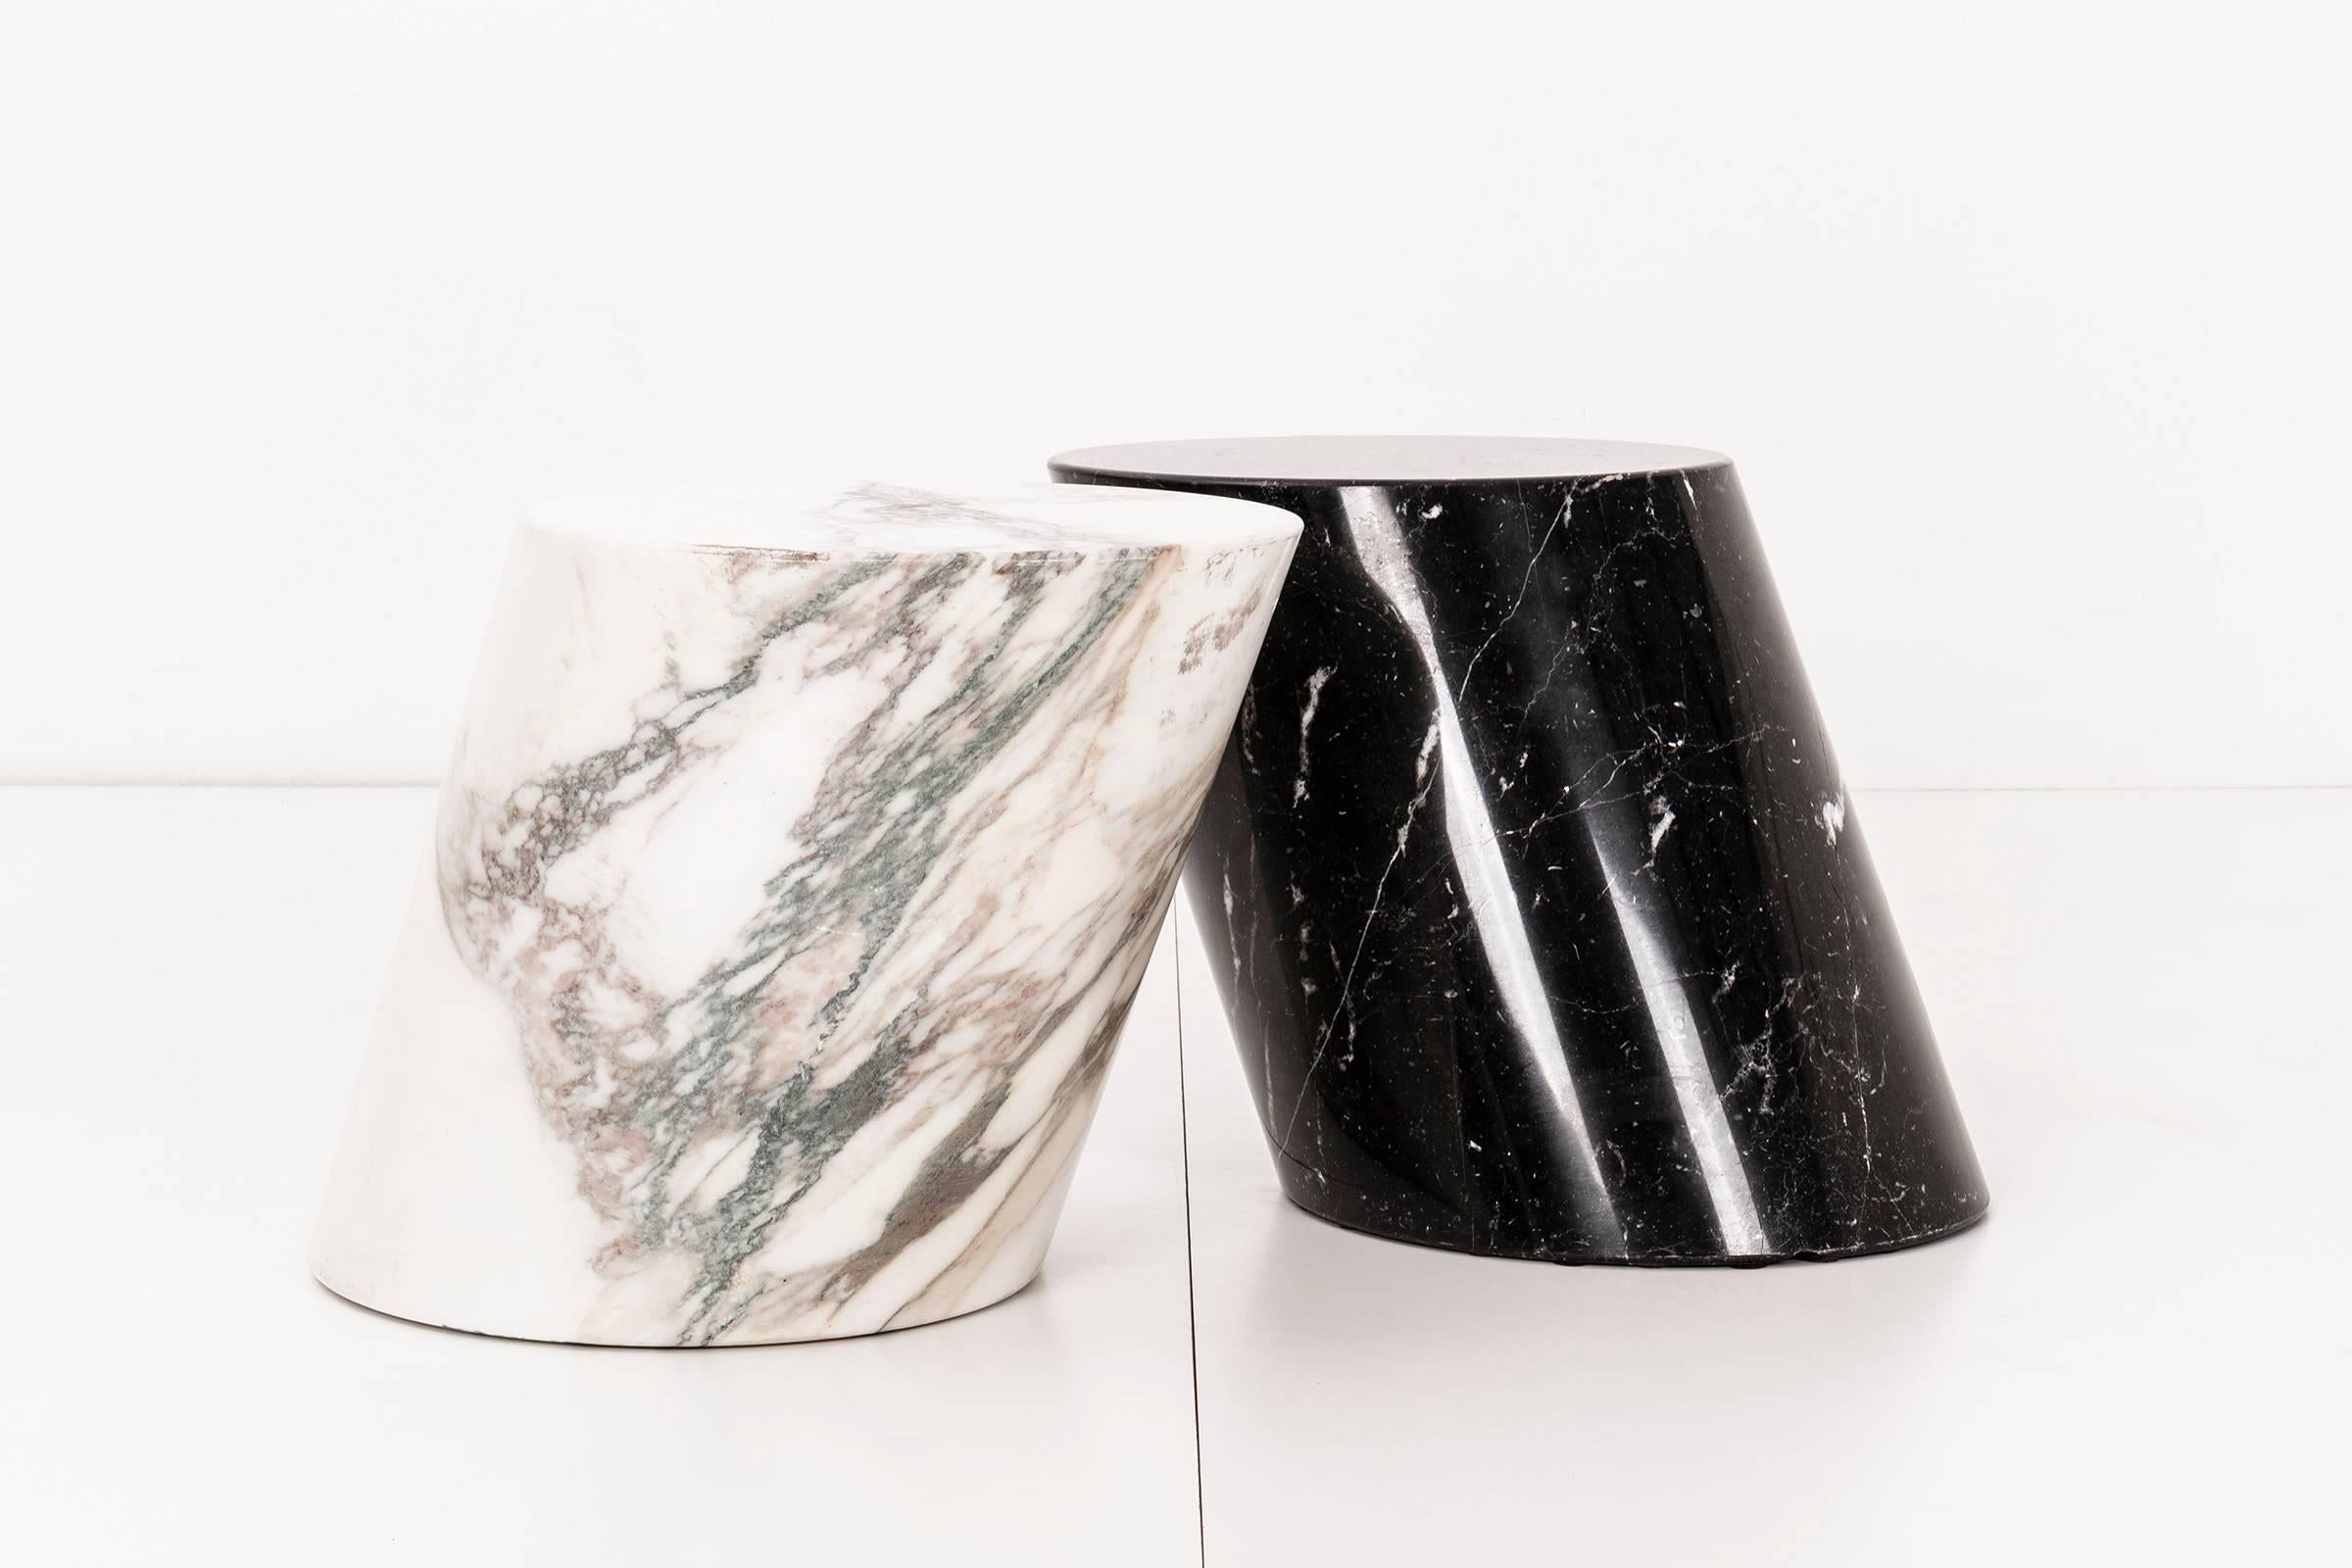 Solid marble stump tables. Nero Marquina and Calcutta gold. Dimensions posted below are of the table surface. The table as a whole has a depth of 21".